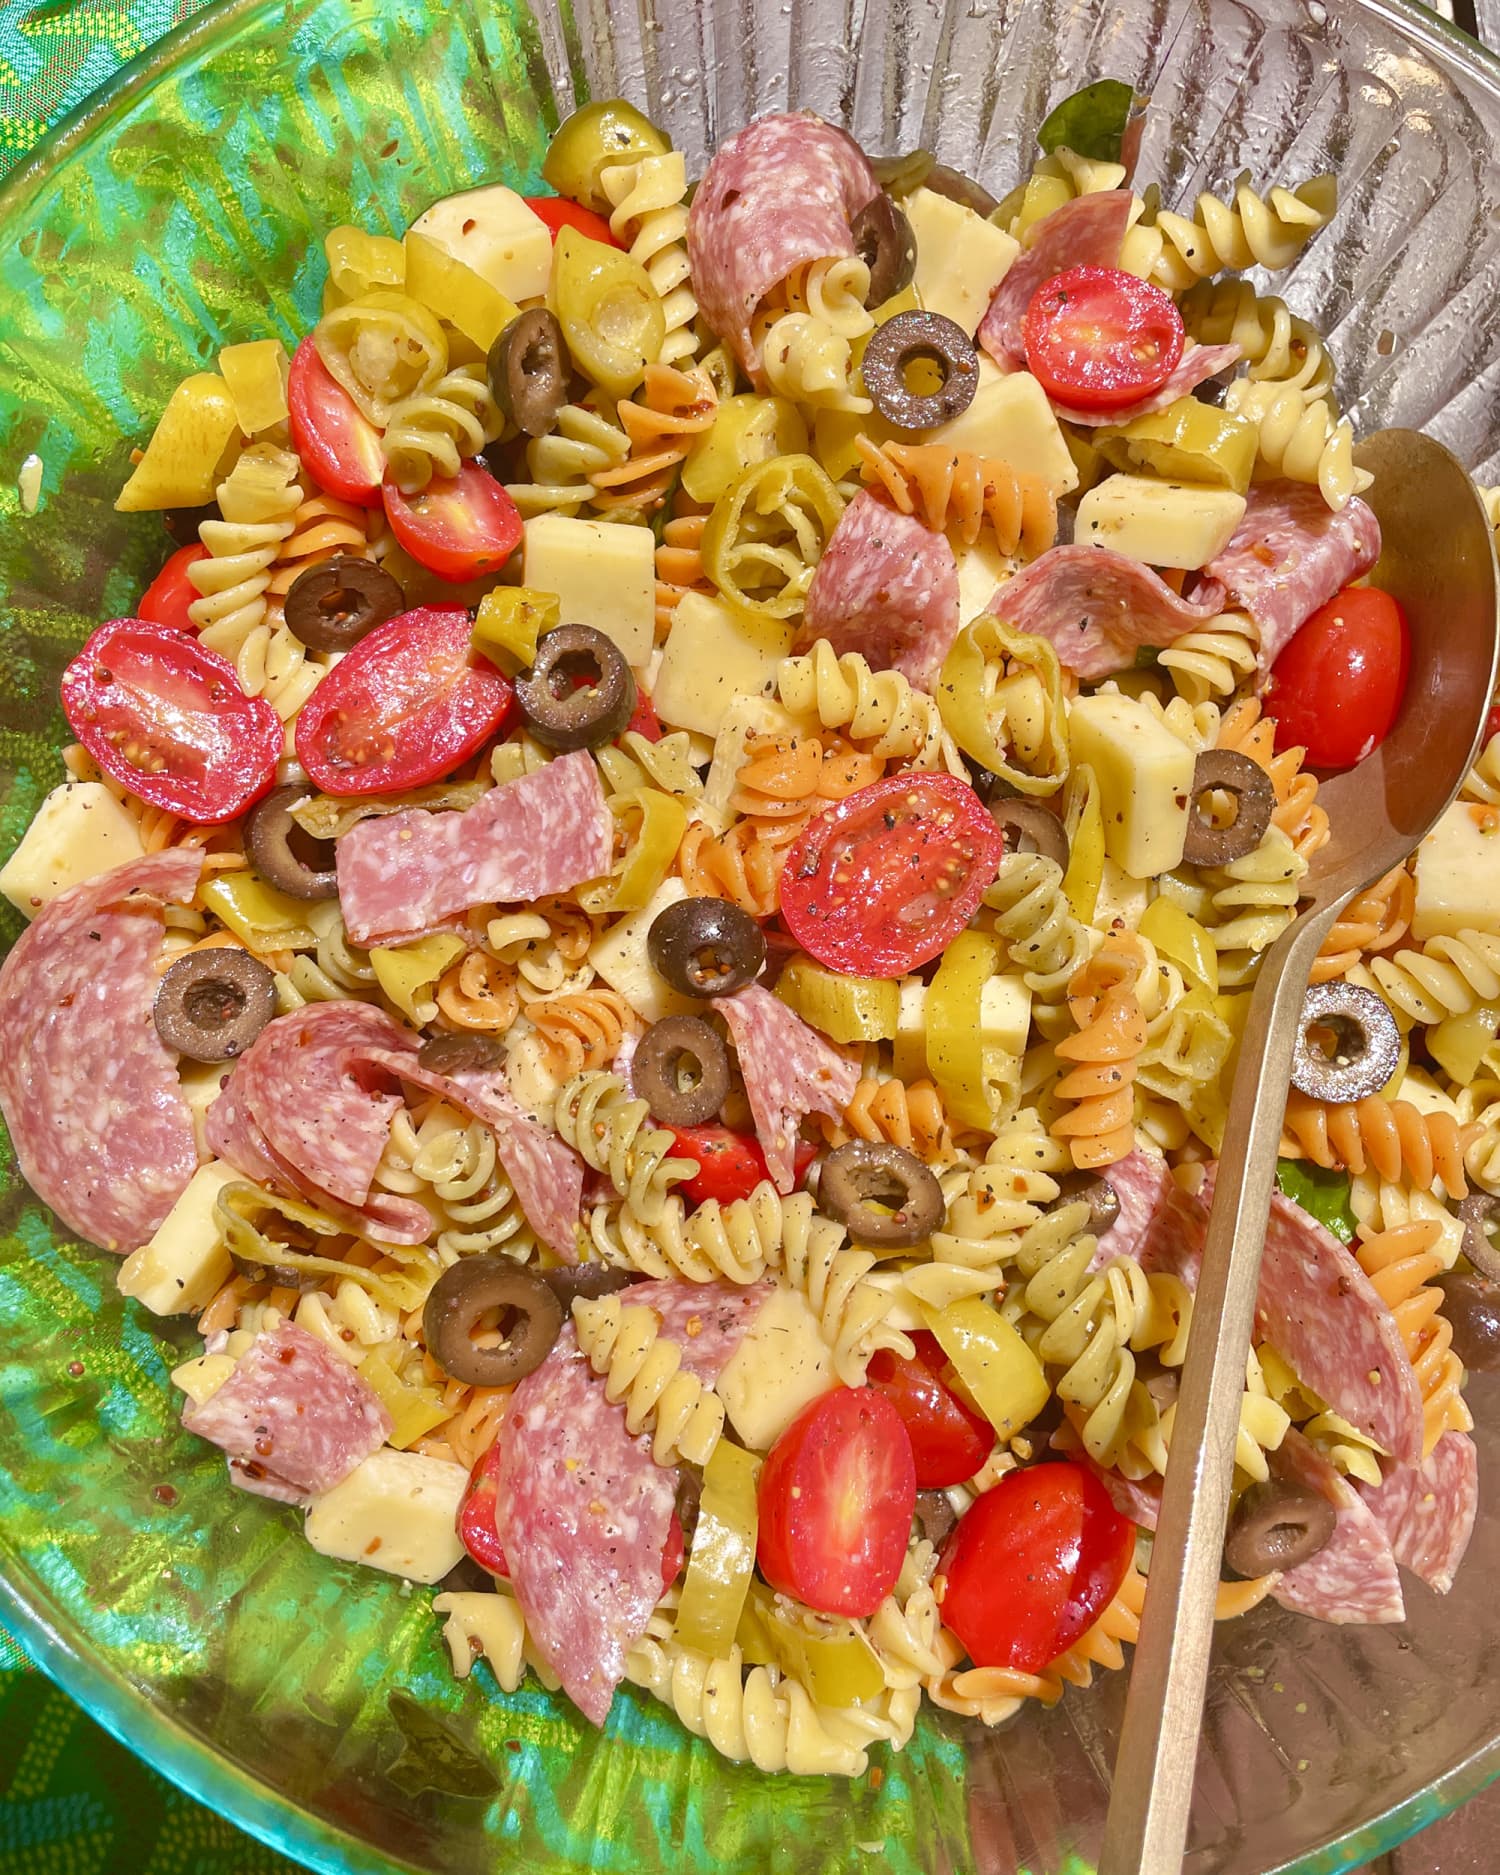 I Tried Grossy Pelosi’s Cherished Family Pasta Salad, and It Totally Exceeded My Expectations